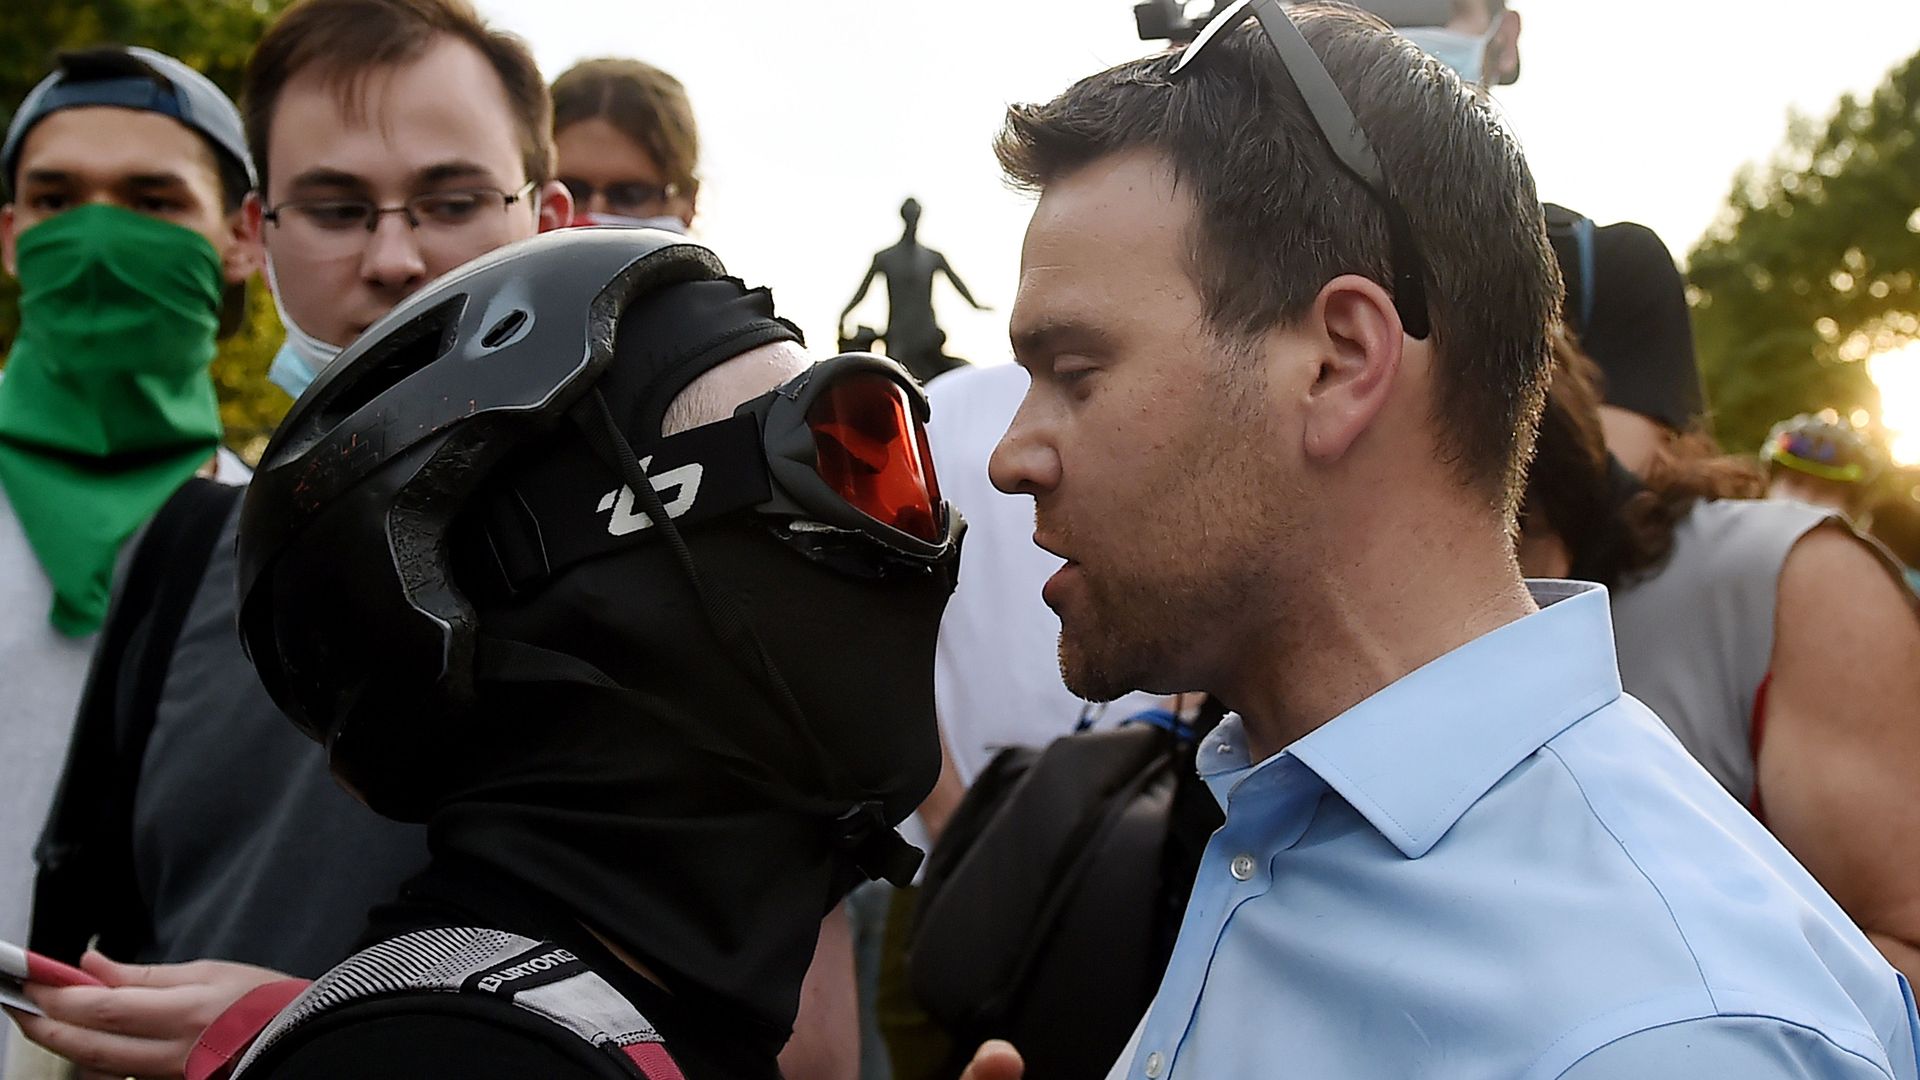 Conservative activist Jack Posobiec is seen arguing with a protestor in Washington last June.